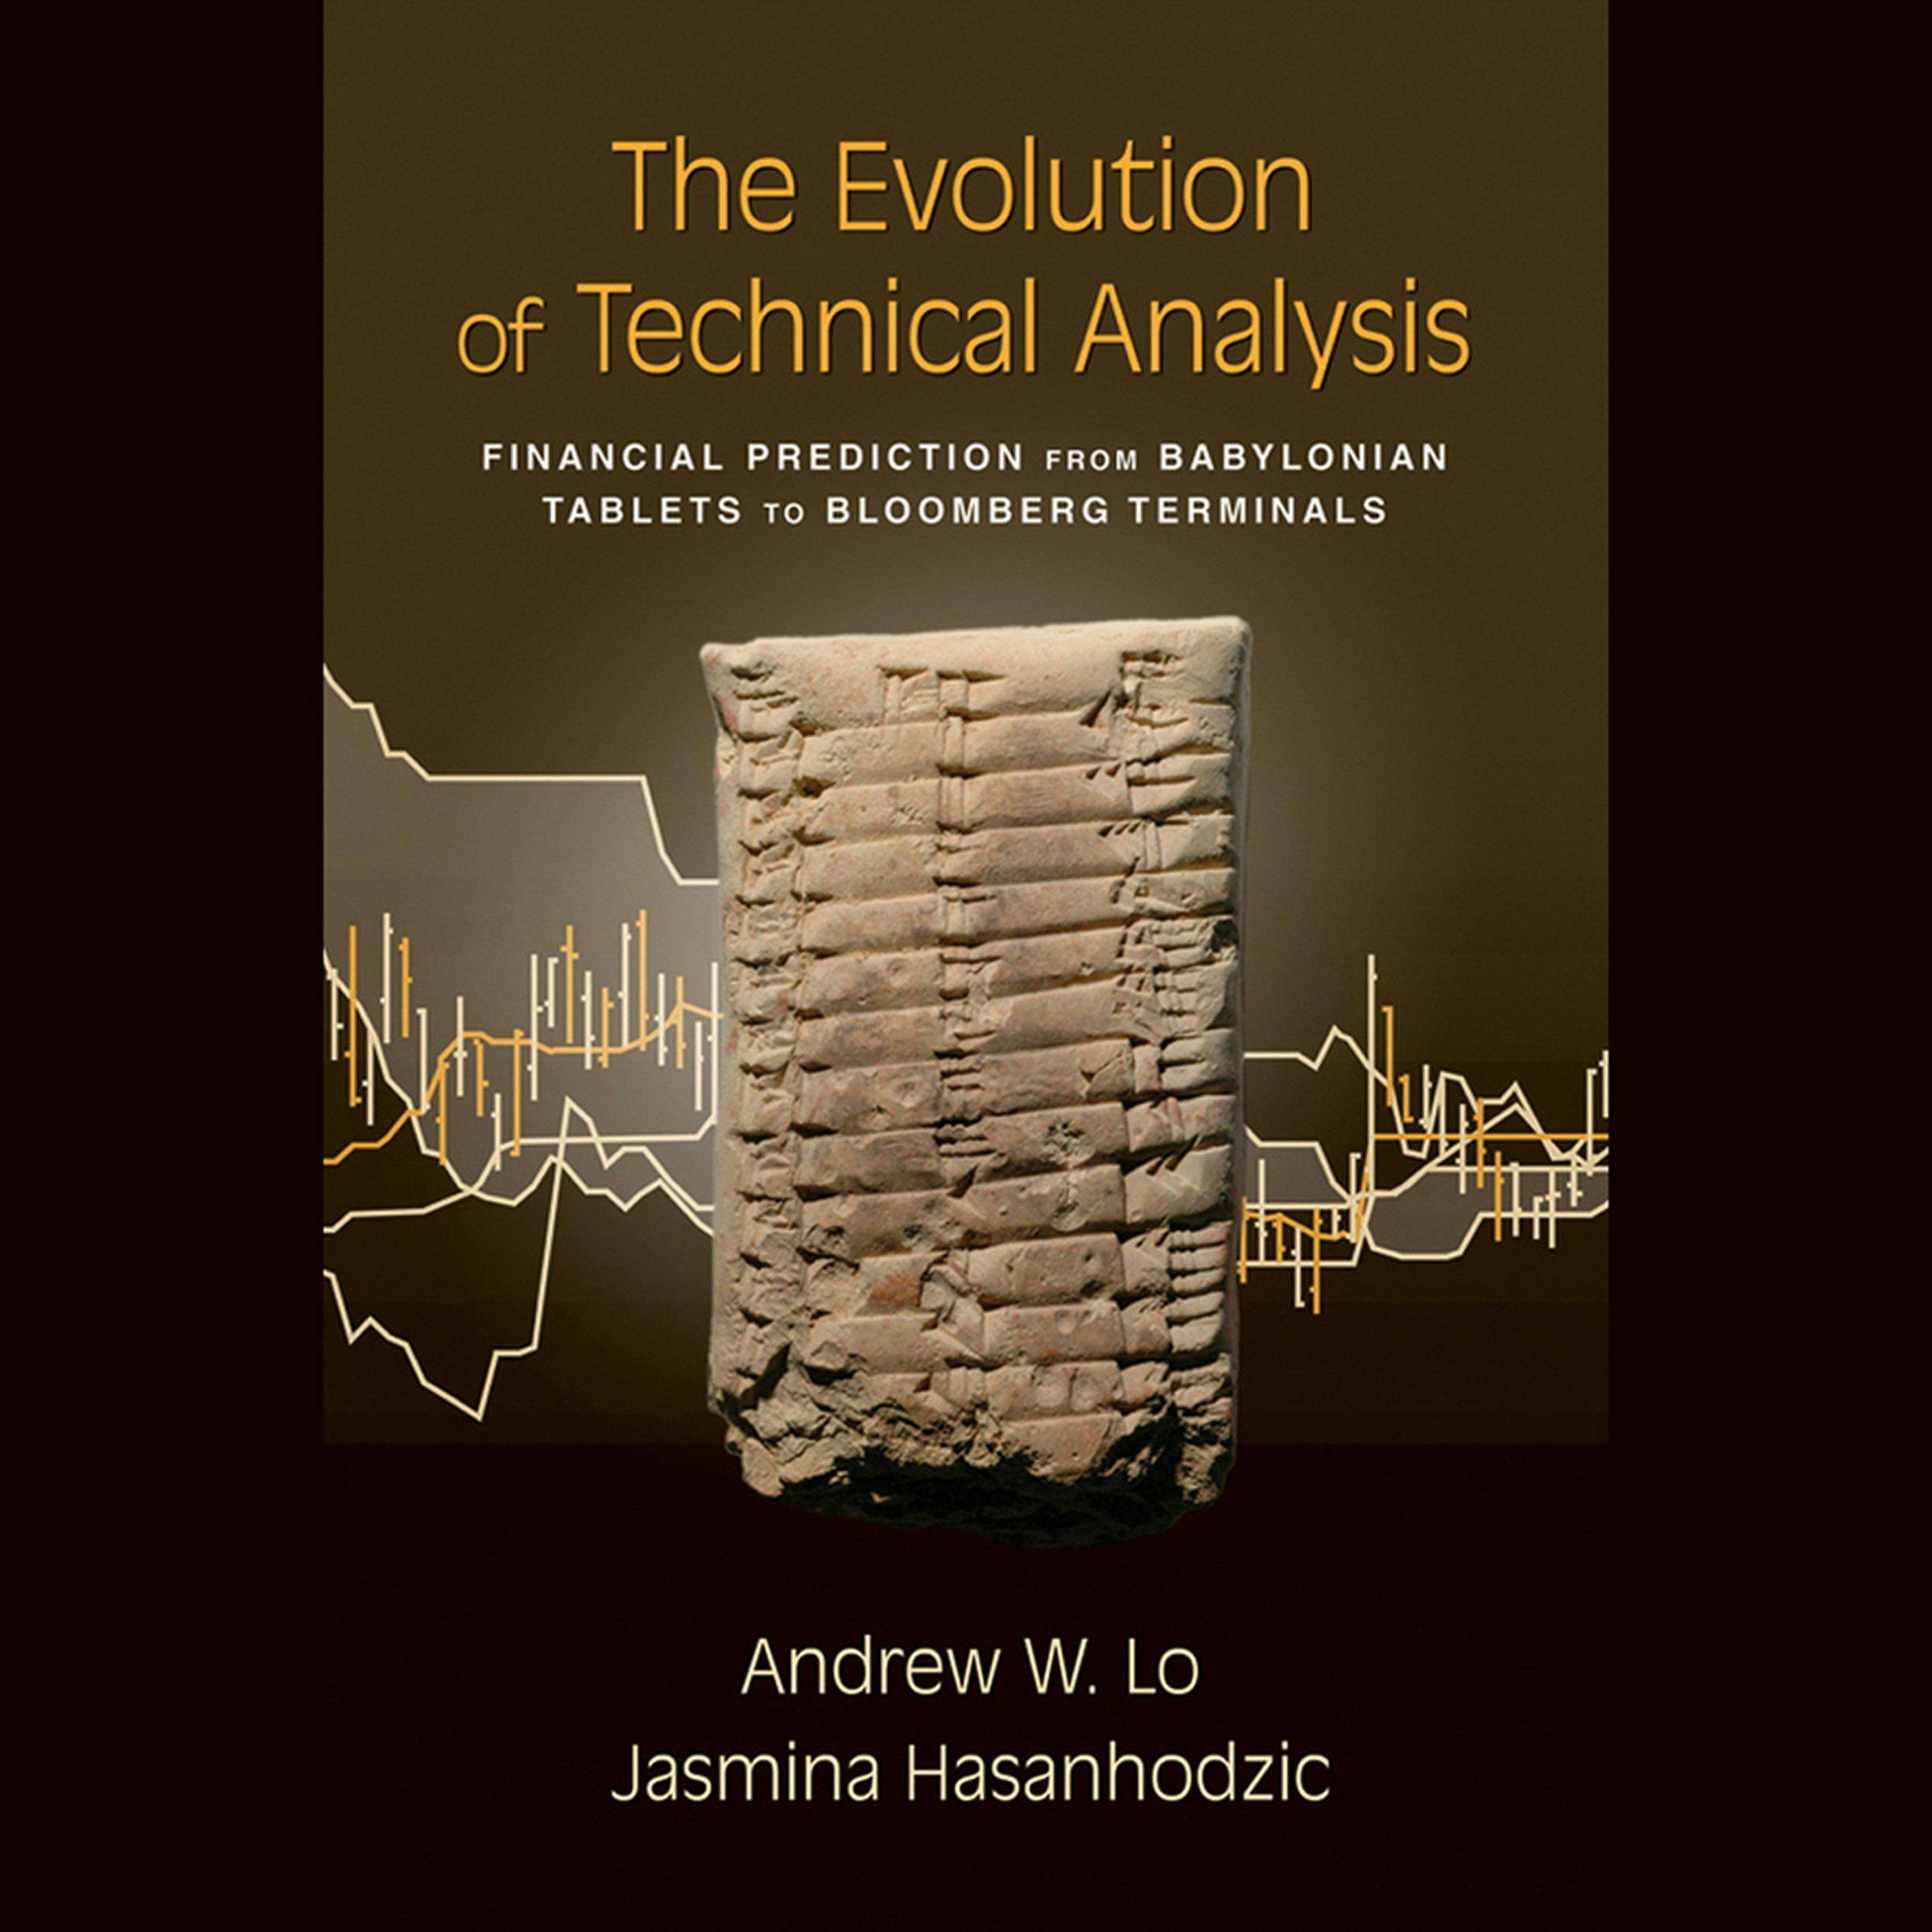 The Evolution of Technical Analysis: Financial Prediction from Babylonian Tablets to Bloomberg Terminals - Jasmina Hasanhodzic, Andrew W. Lo